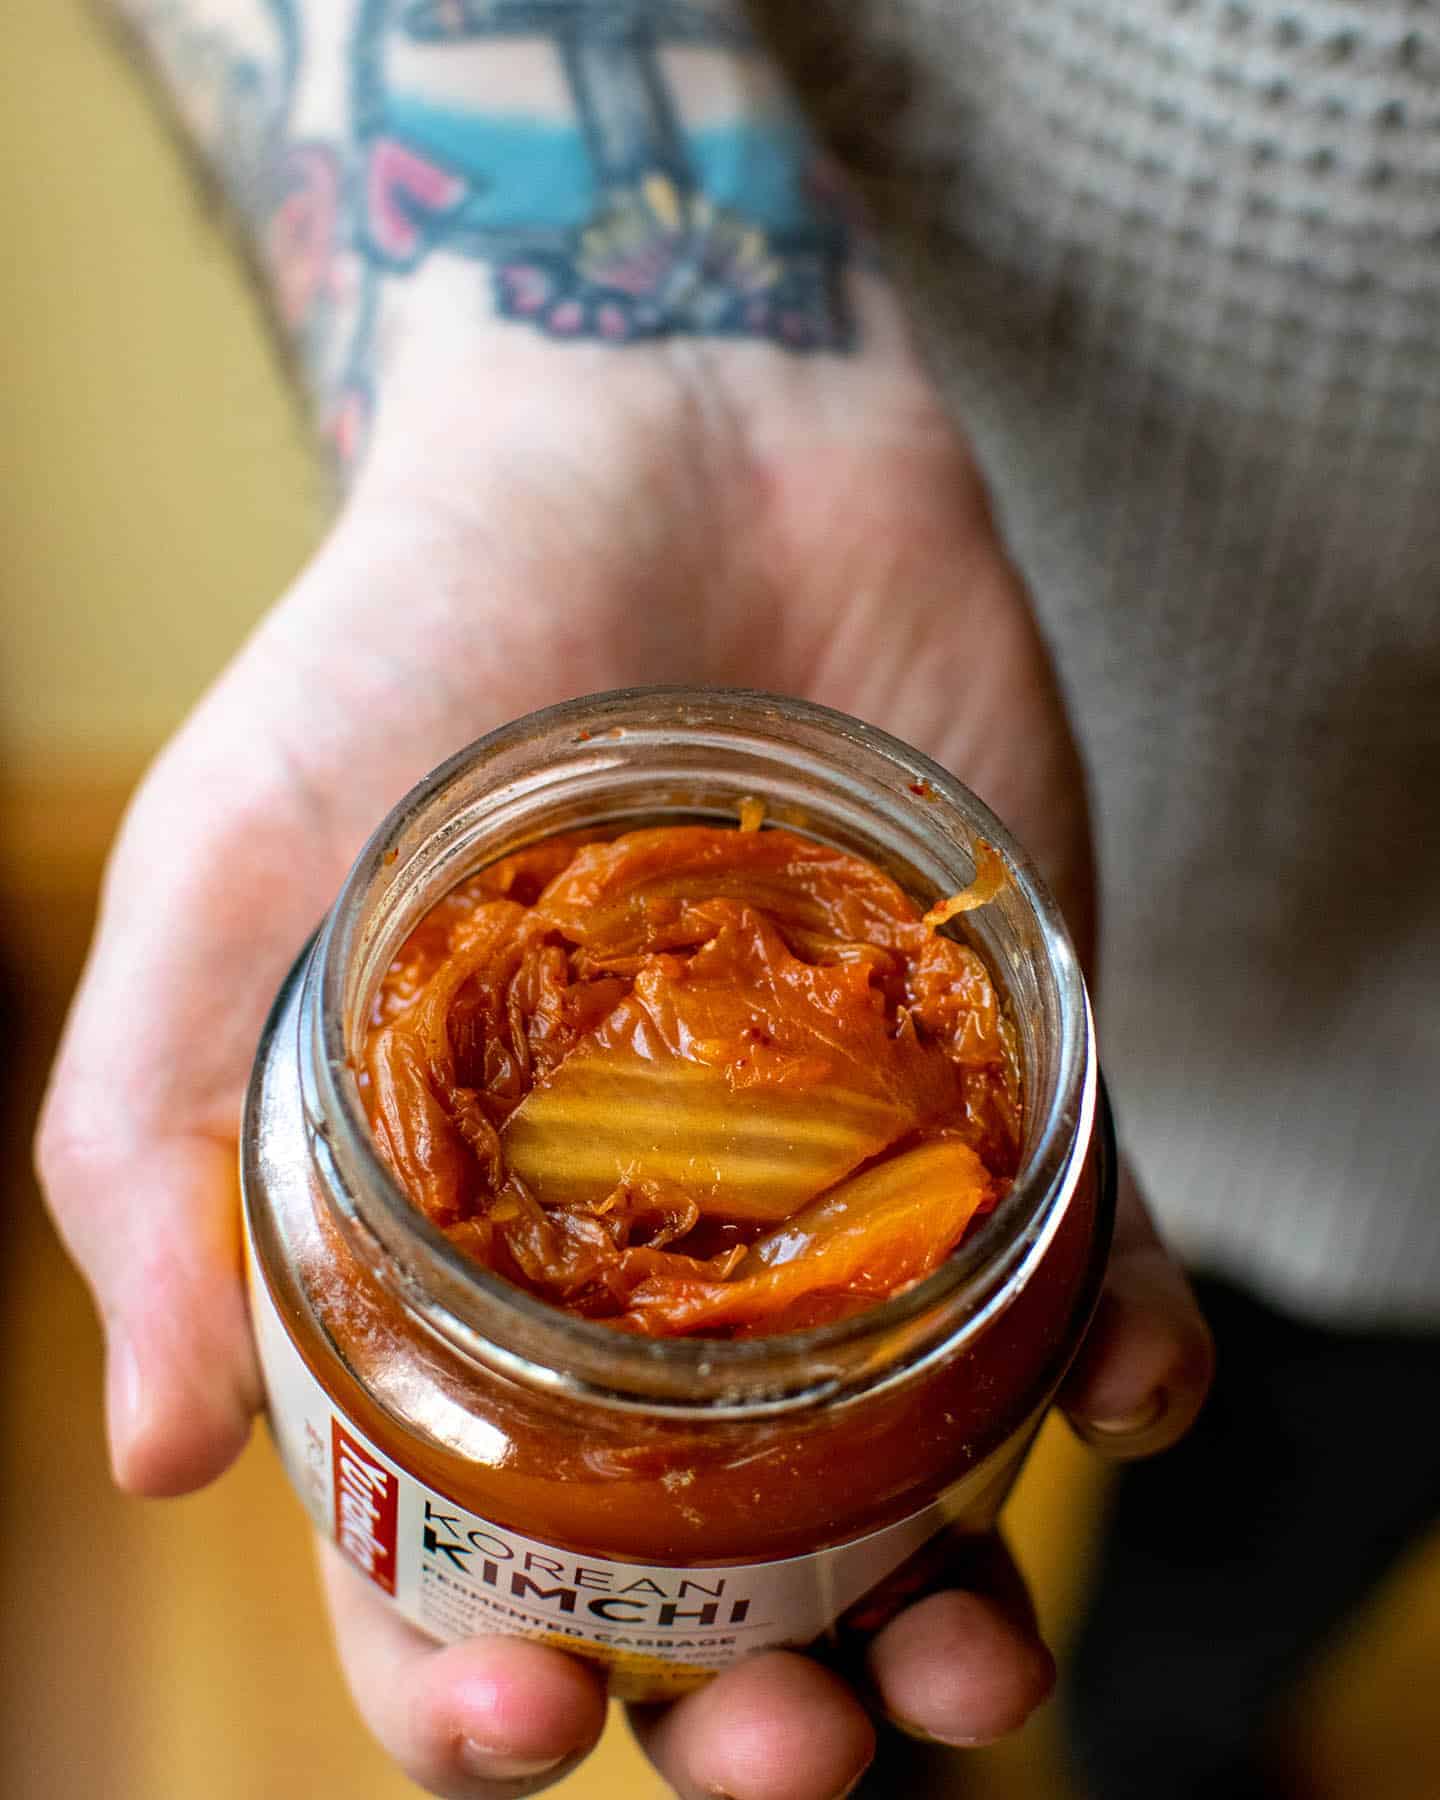 An open jar of kimchi being held by a man's hand with tattoos visible on his wrist